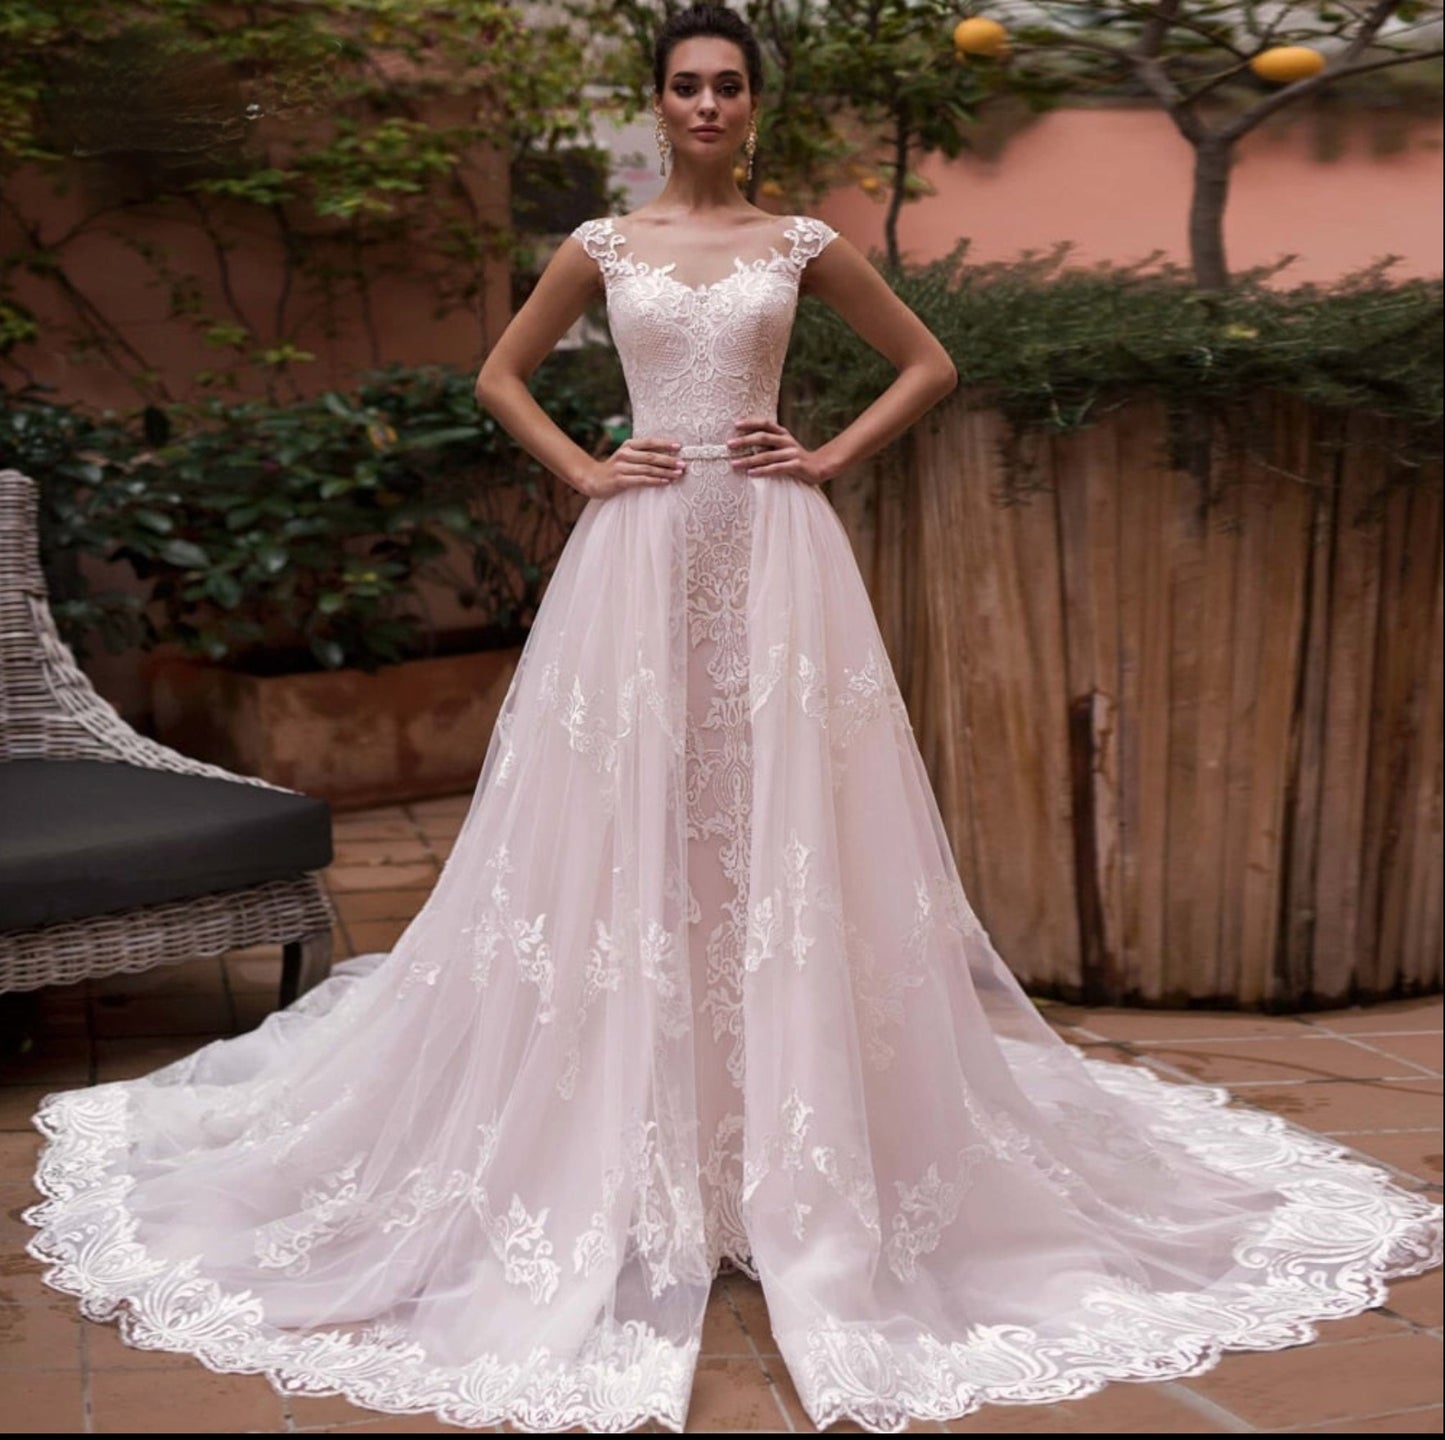 Lace Mermaid Bridal Gown With Removable Sleeves – Tux-USA